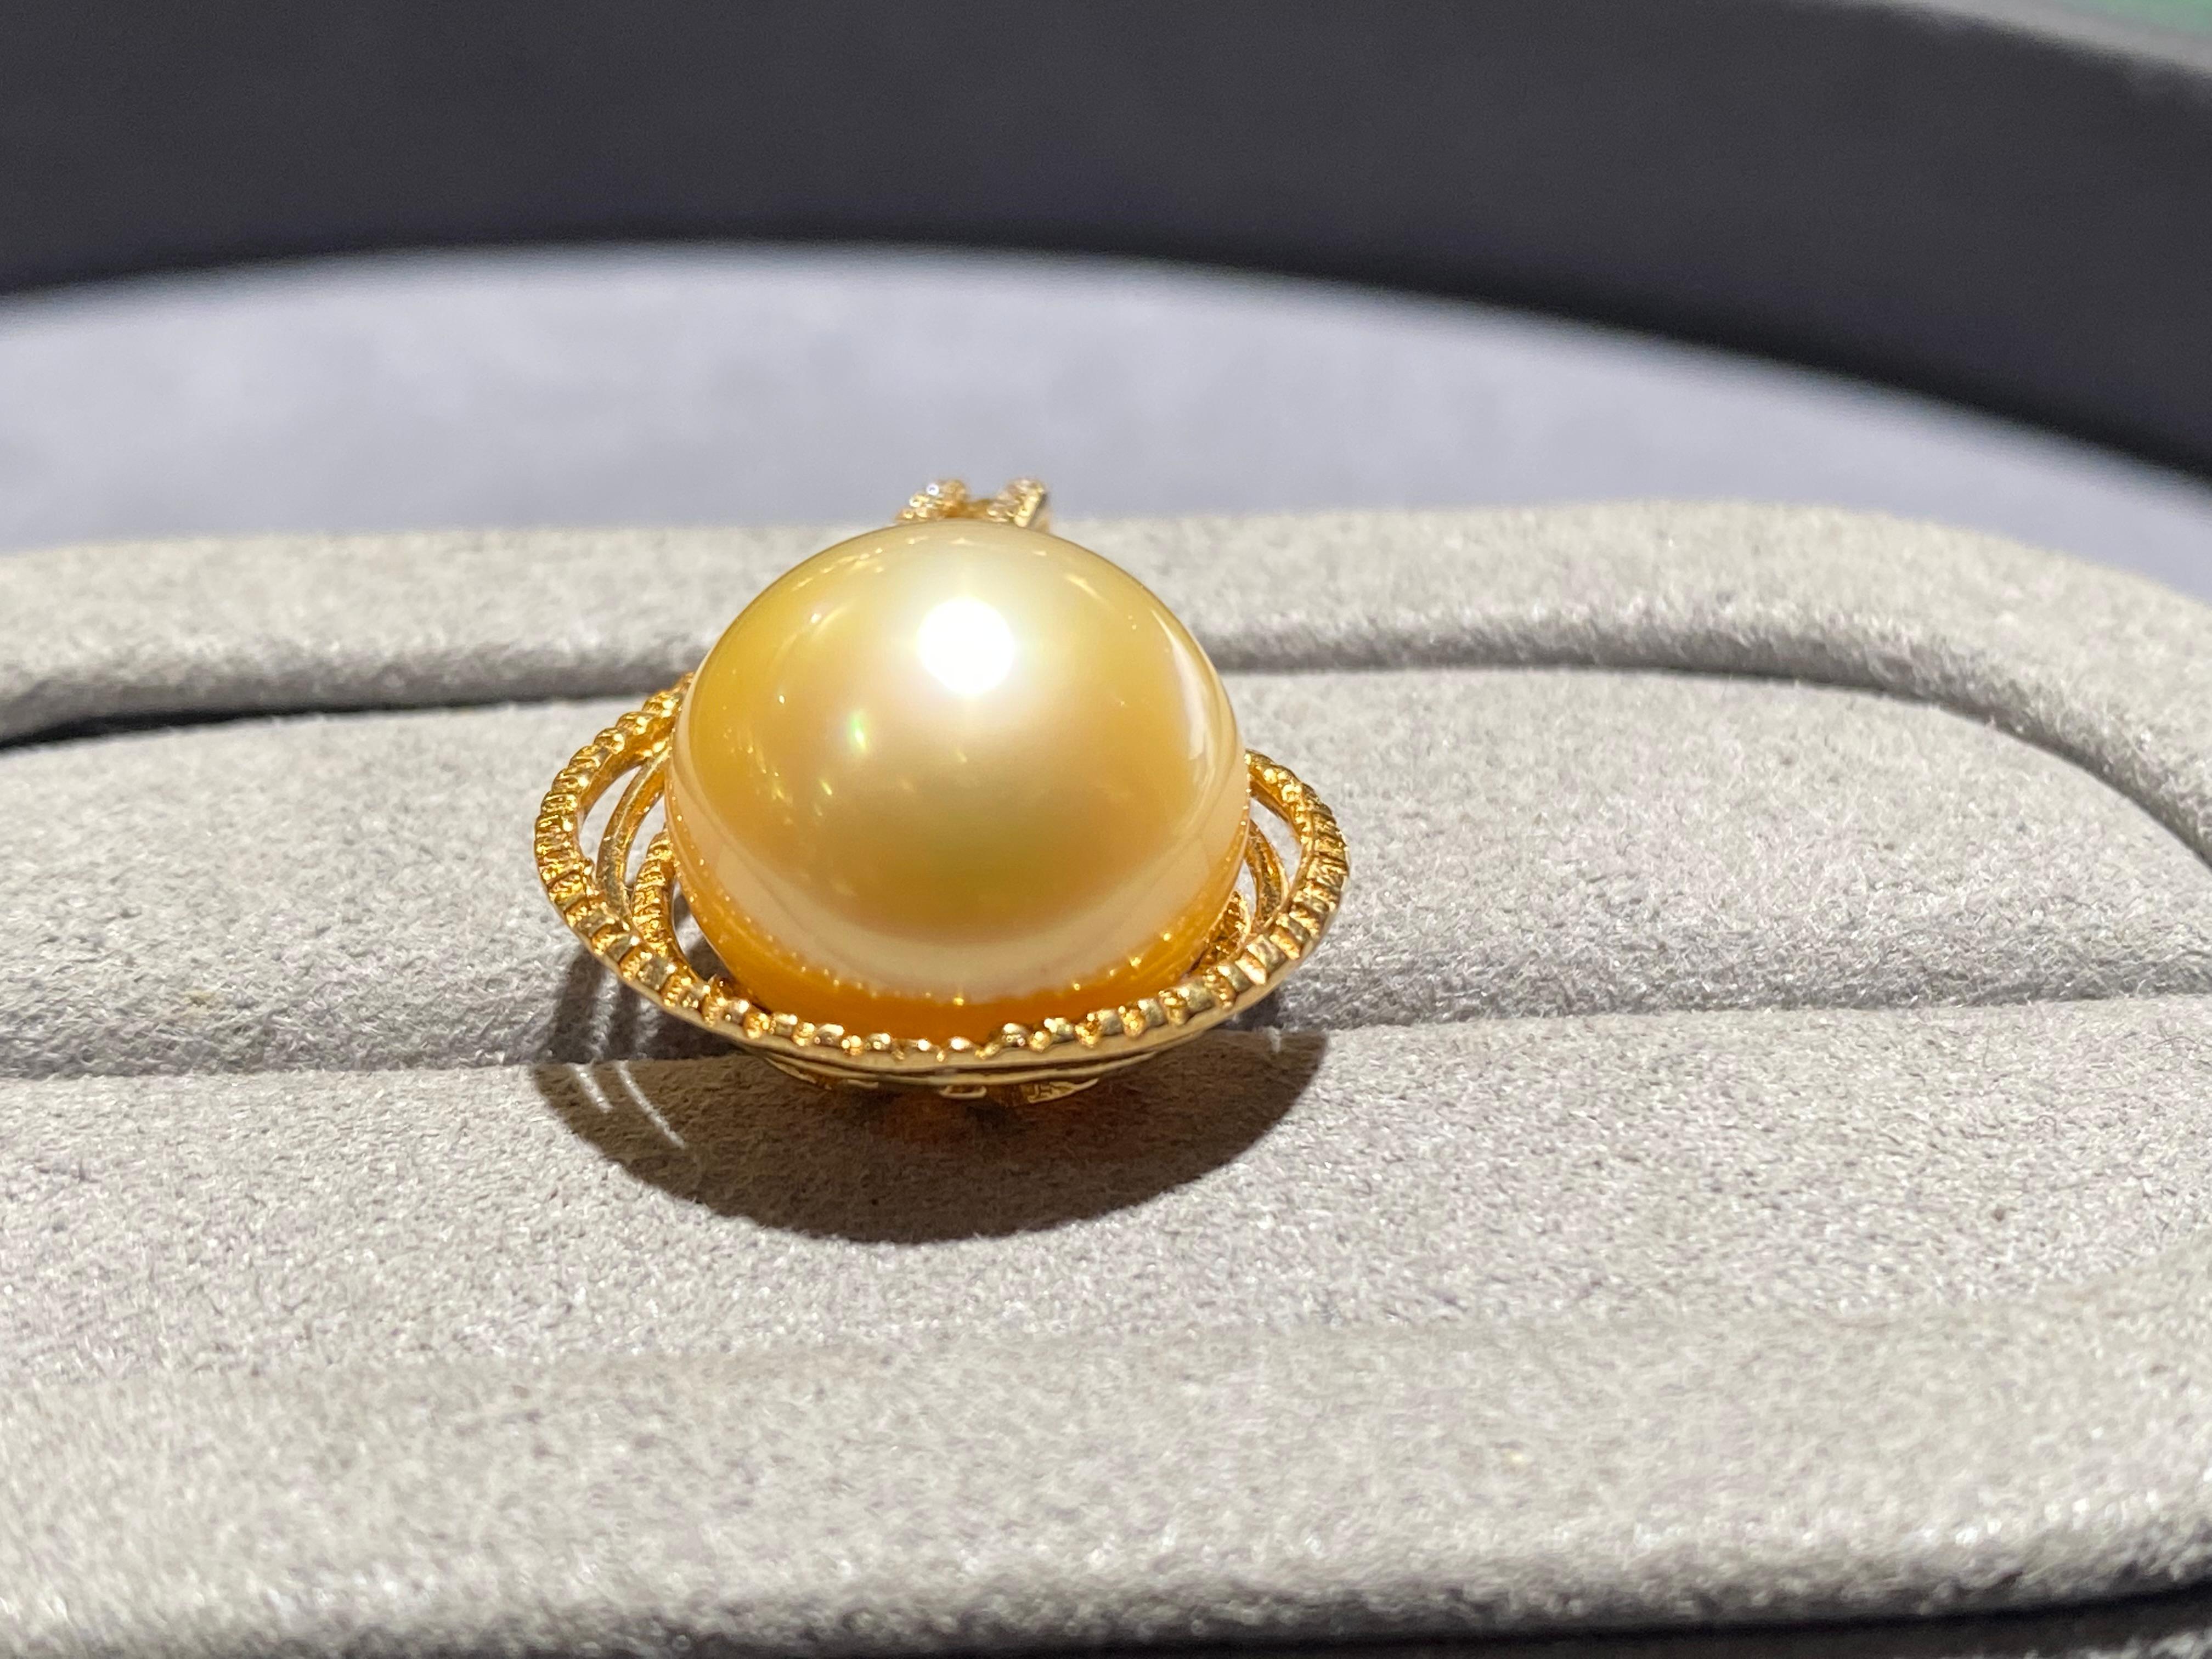 A 13.2 mm round golden colour south sea pearl and diamond pendant in 18k yellow gold. The pendant resemble a rain drop and the south sea pearl is sitting at the bottom of the pendant. Micro diamonds are set near the bale which gives a pendant a